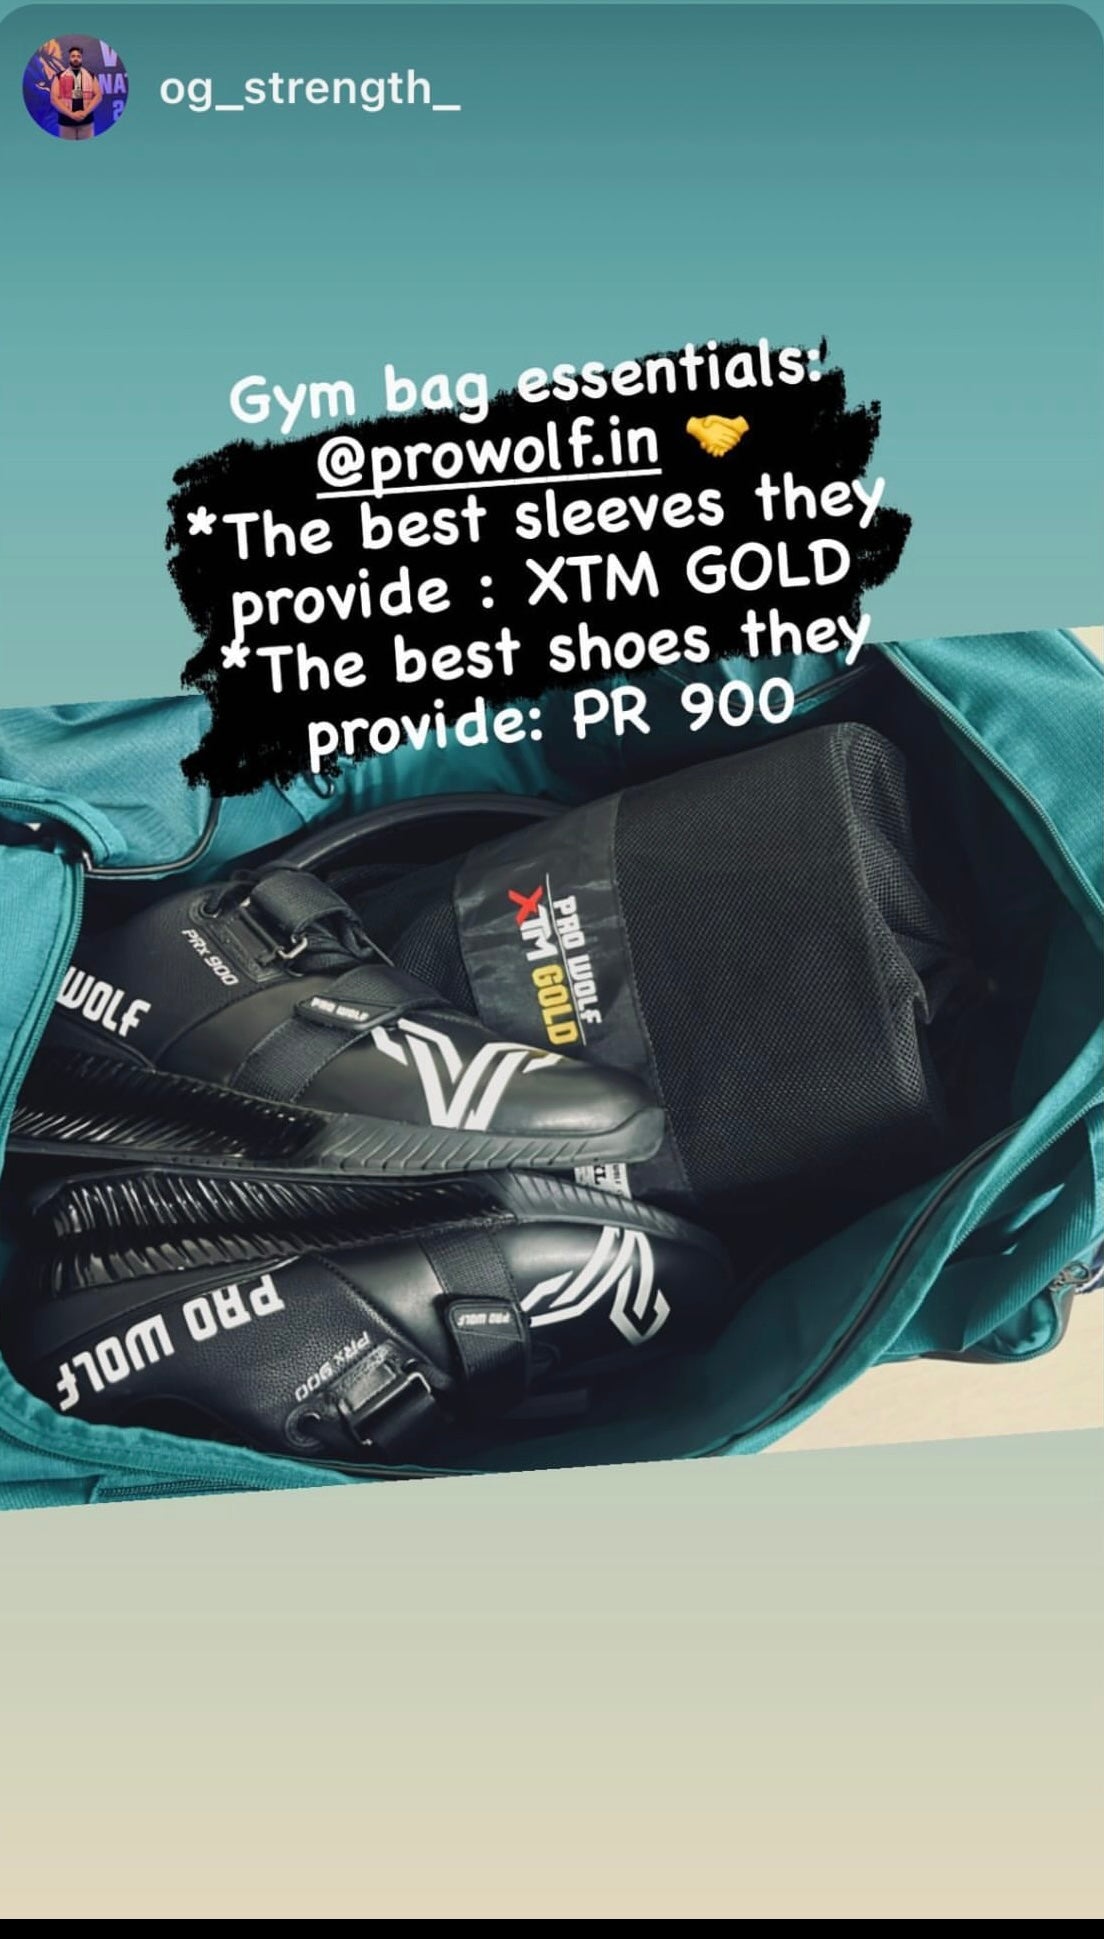 Pro Wolf products photos shared by customer